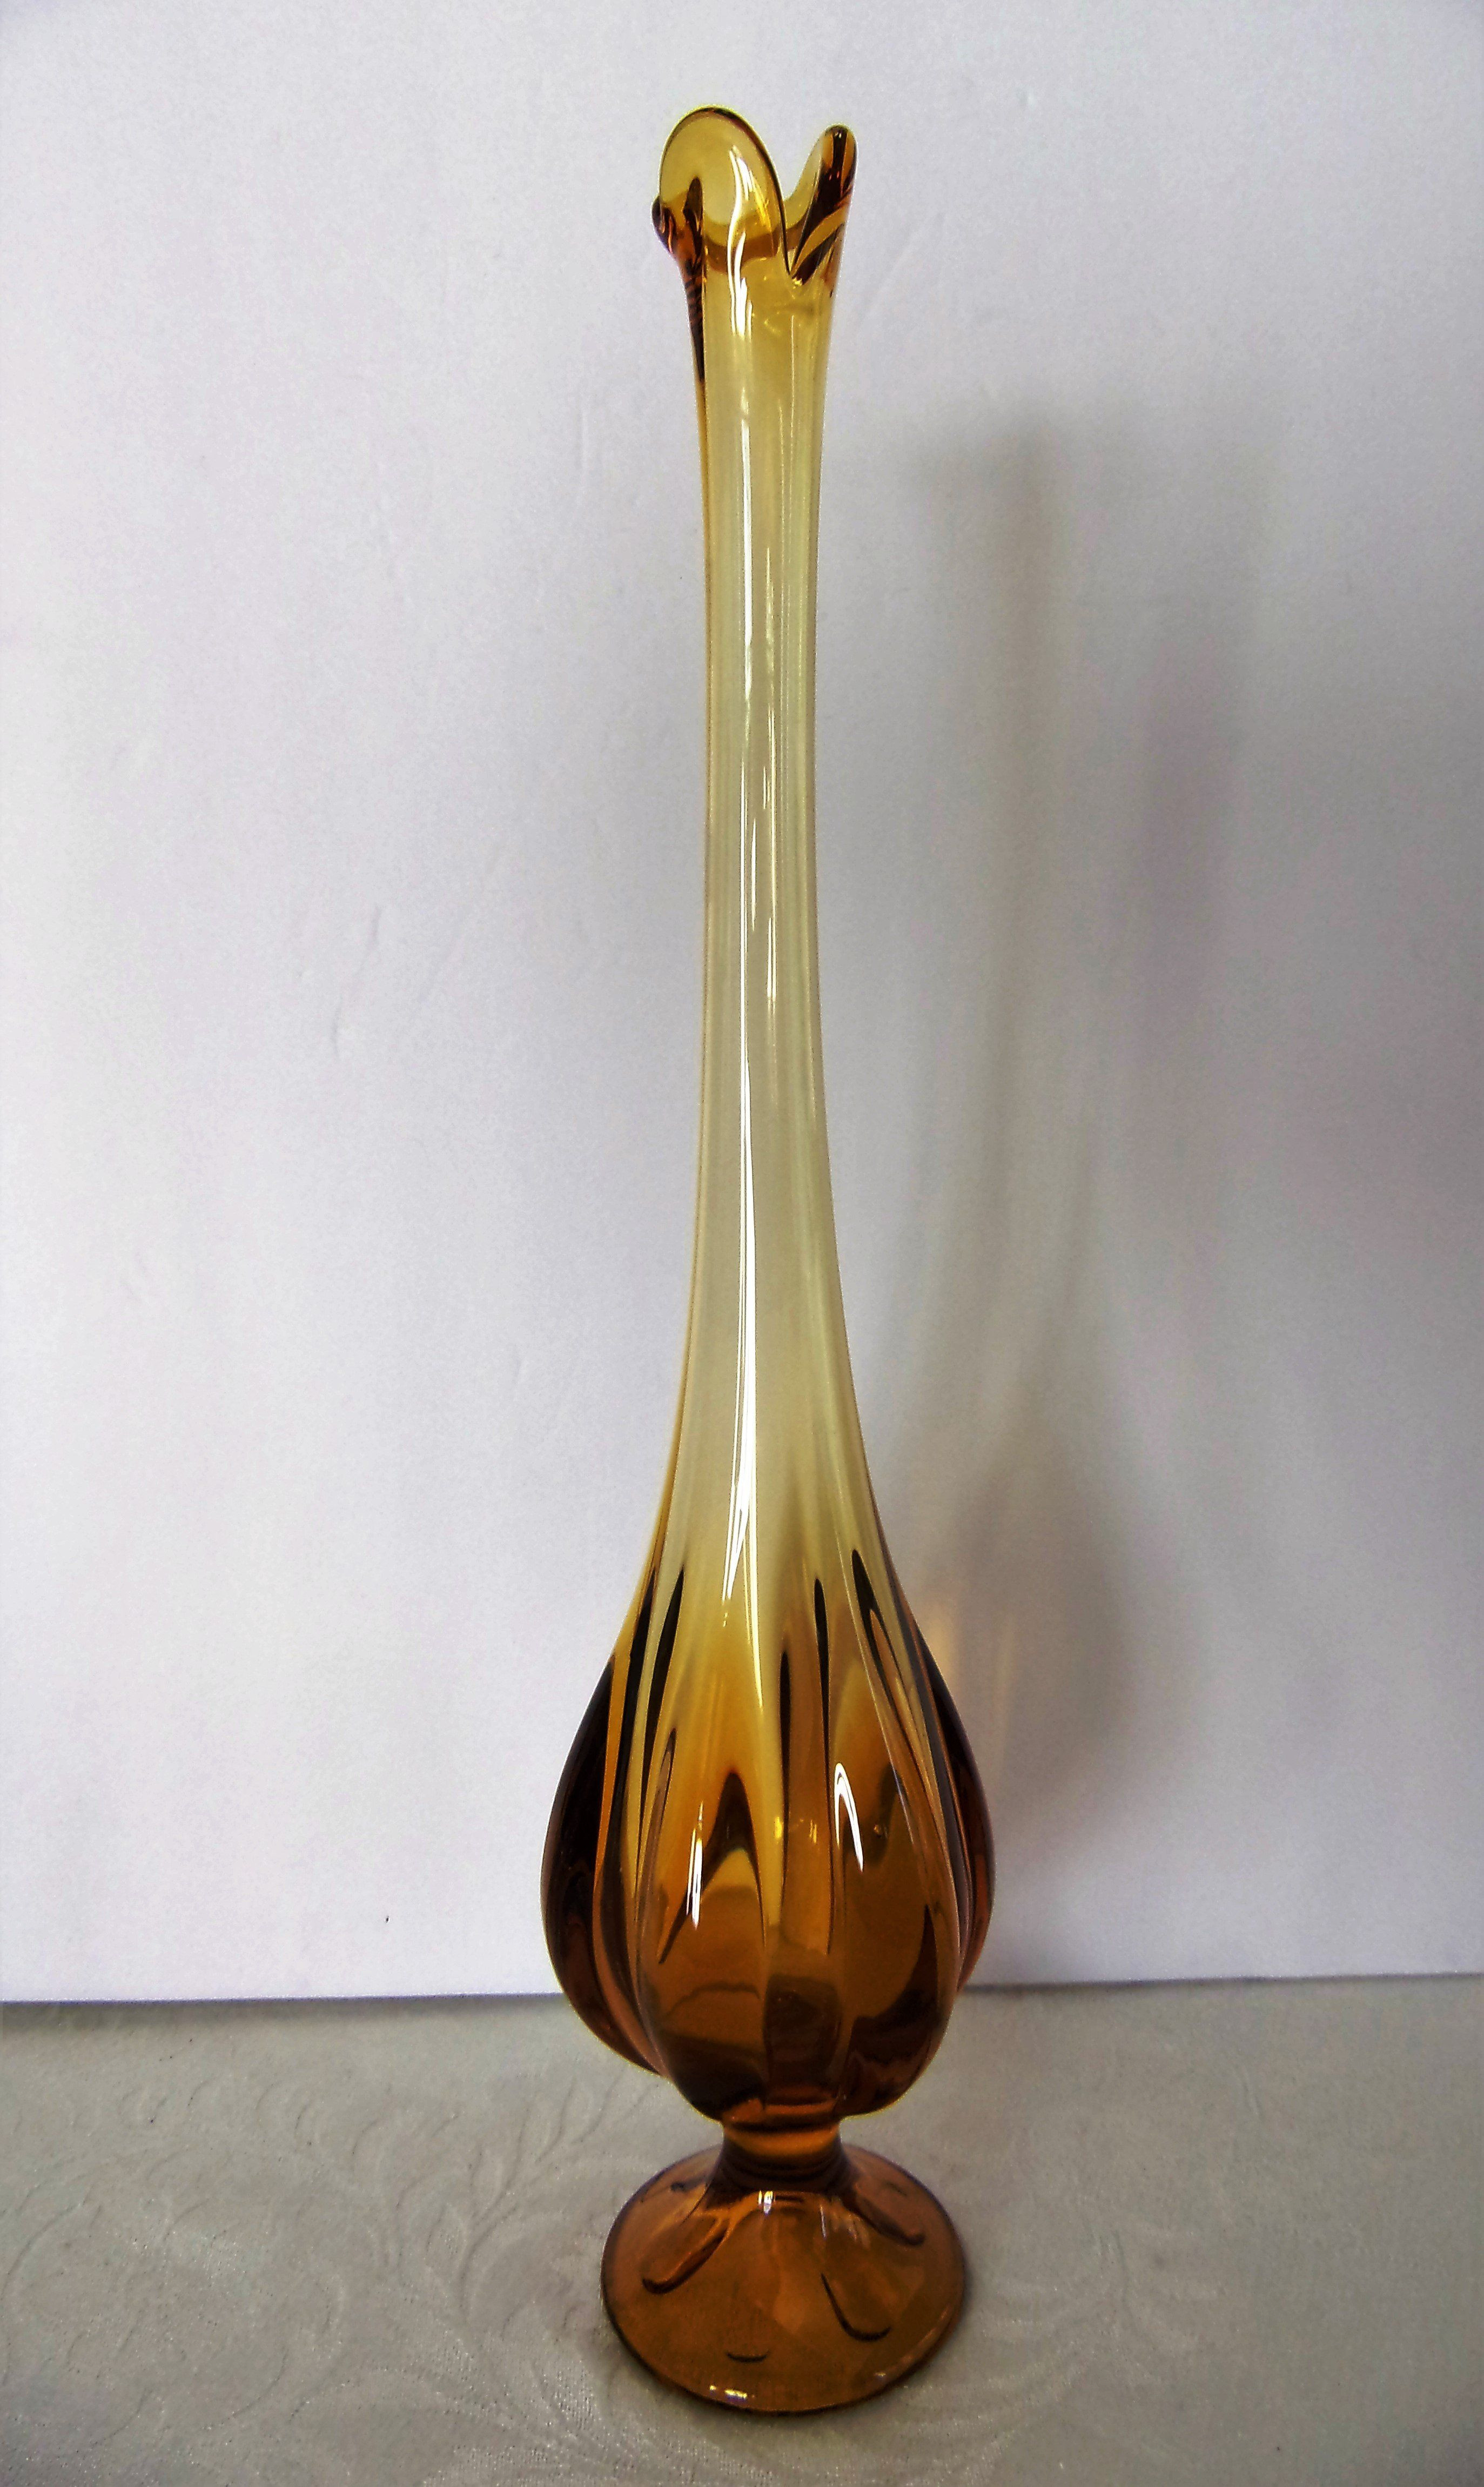 29 attractive 6 Inch Bud Vase 2024 free download 6 inch bud vase of this is a great looking amber bud vase by viking glass co i want to intended for this is a great looking amber bud vase by viking glass co i want to